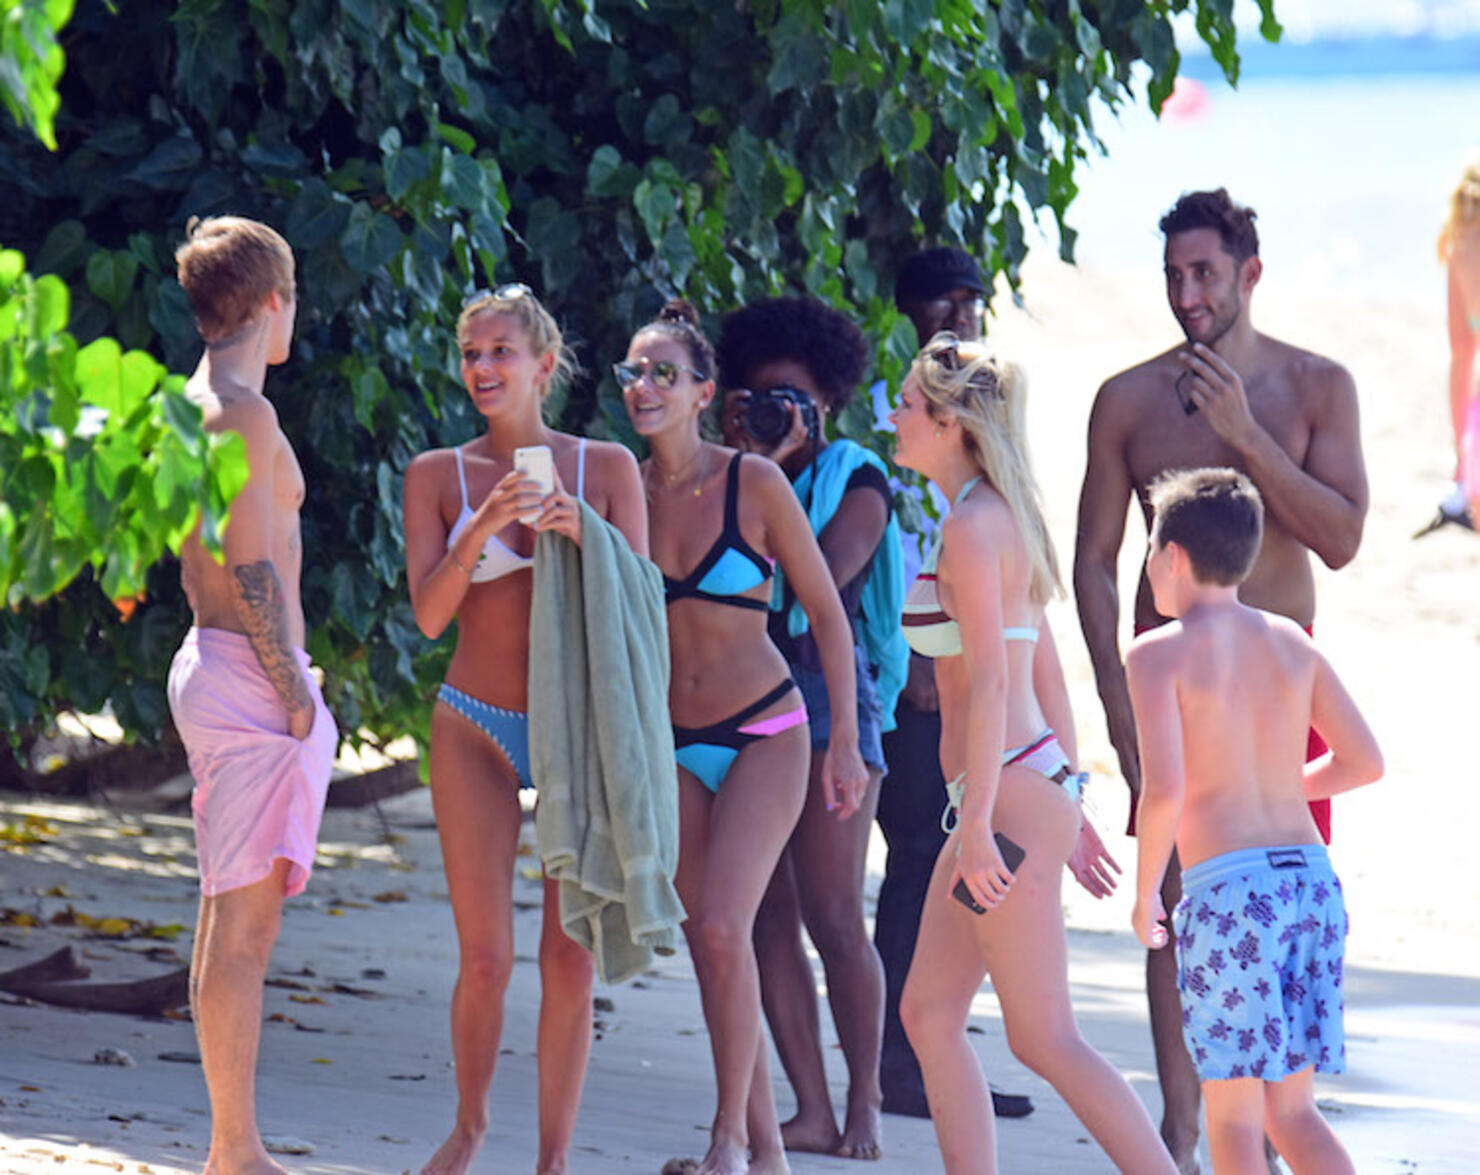 Shirtless Justin Bieber laps up the attention at the beach on Barbados getaway.